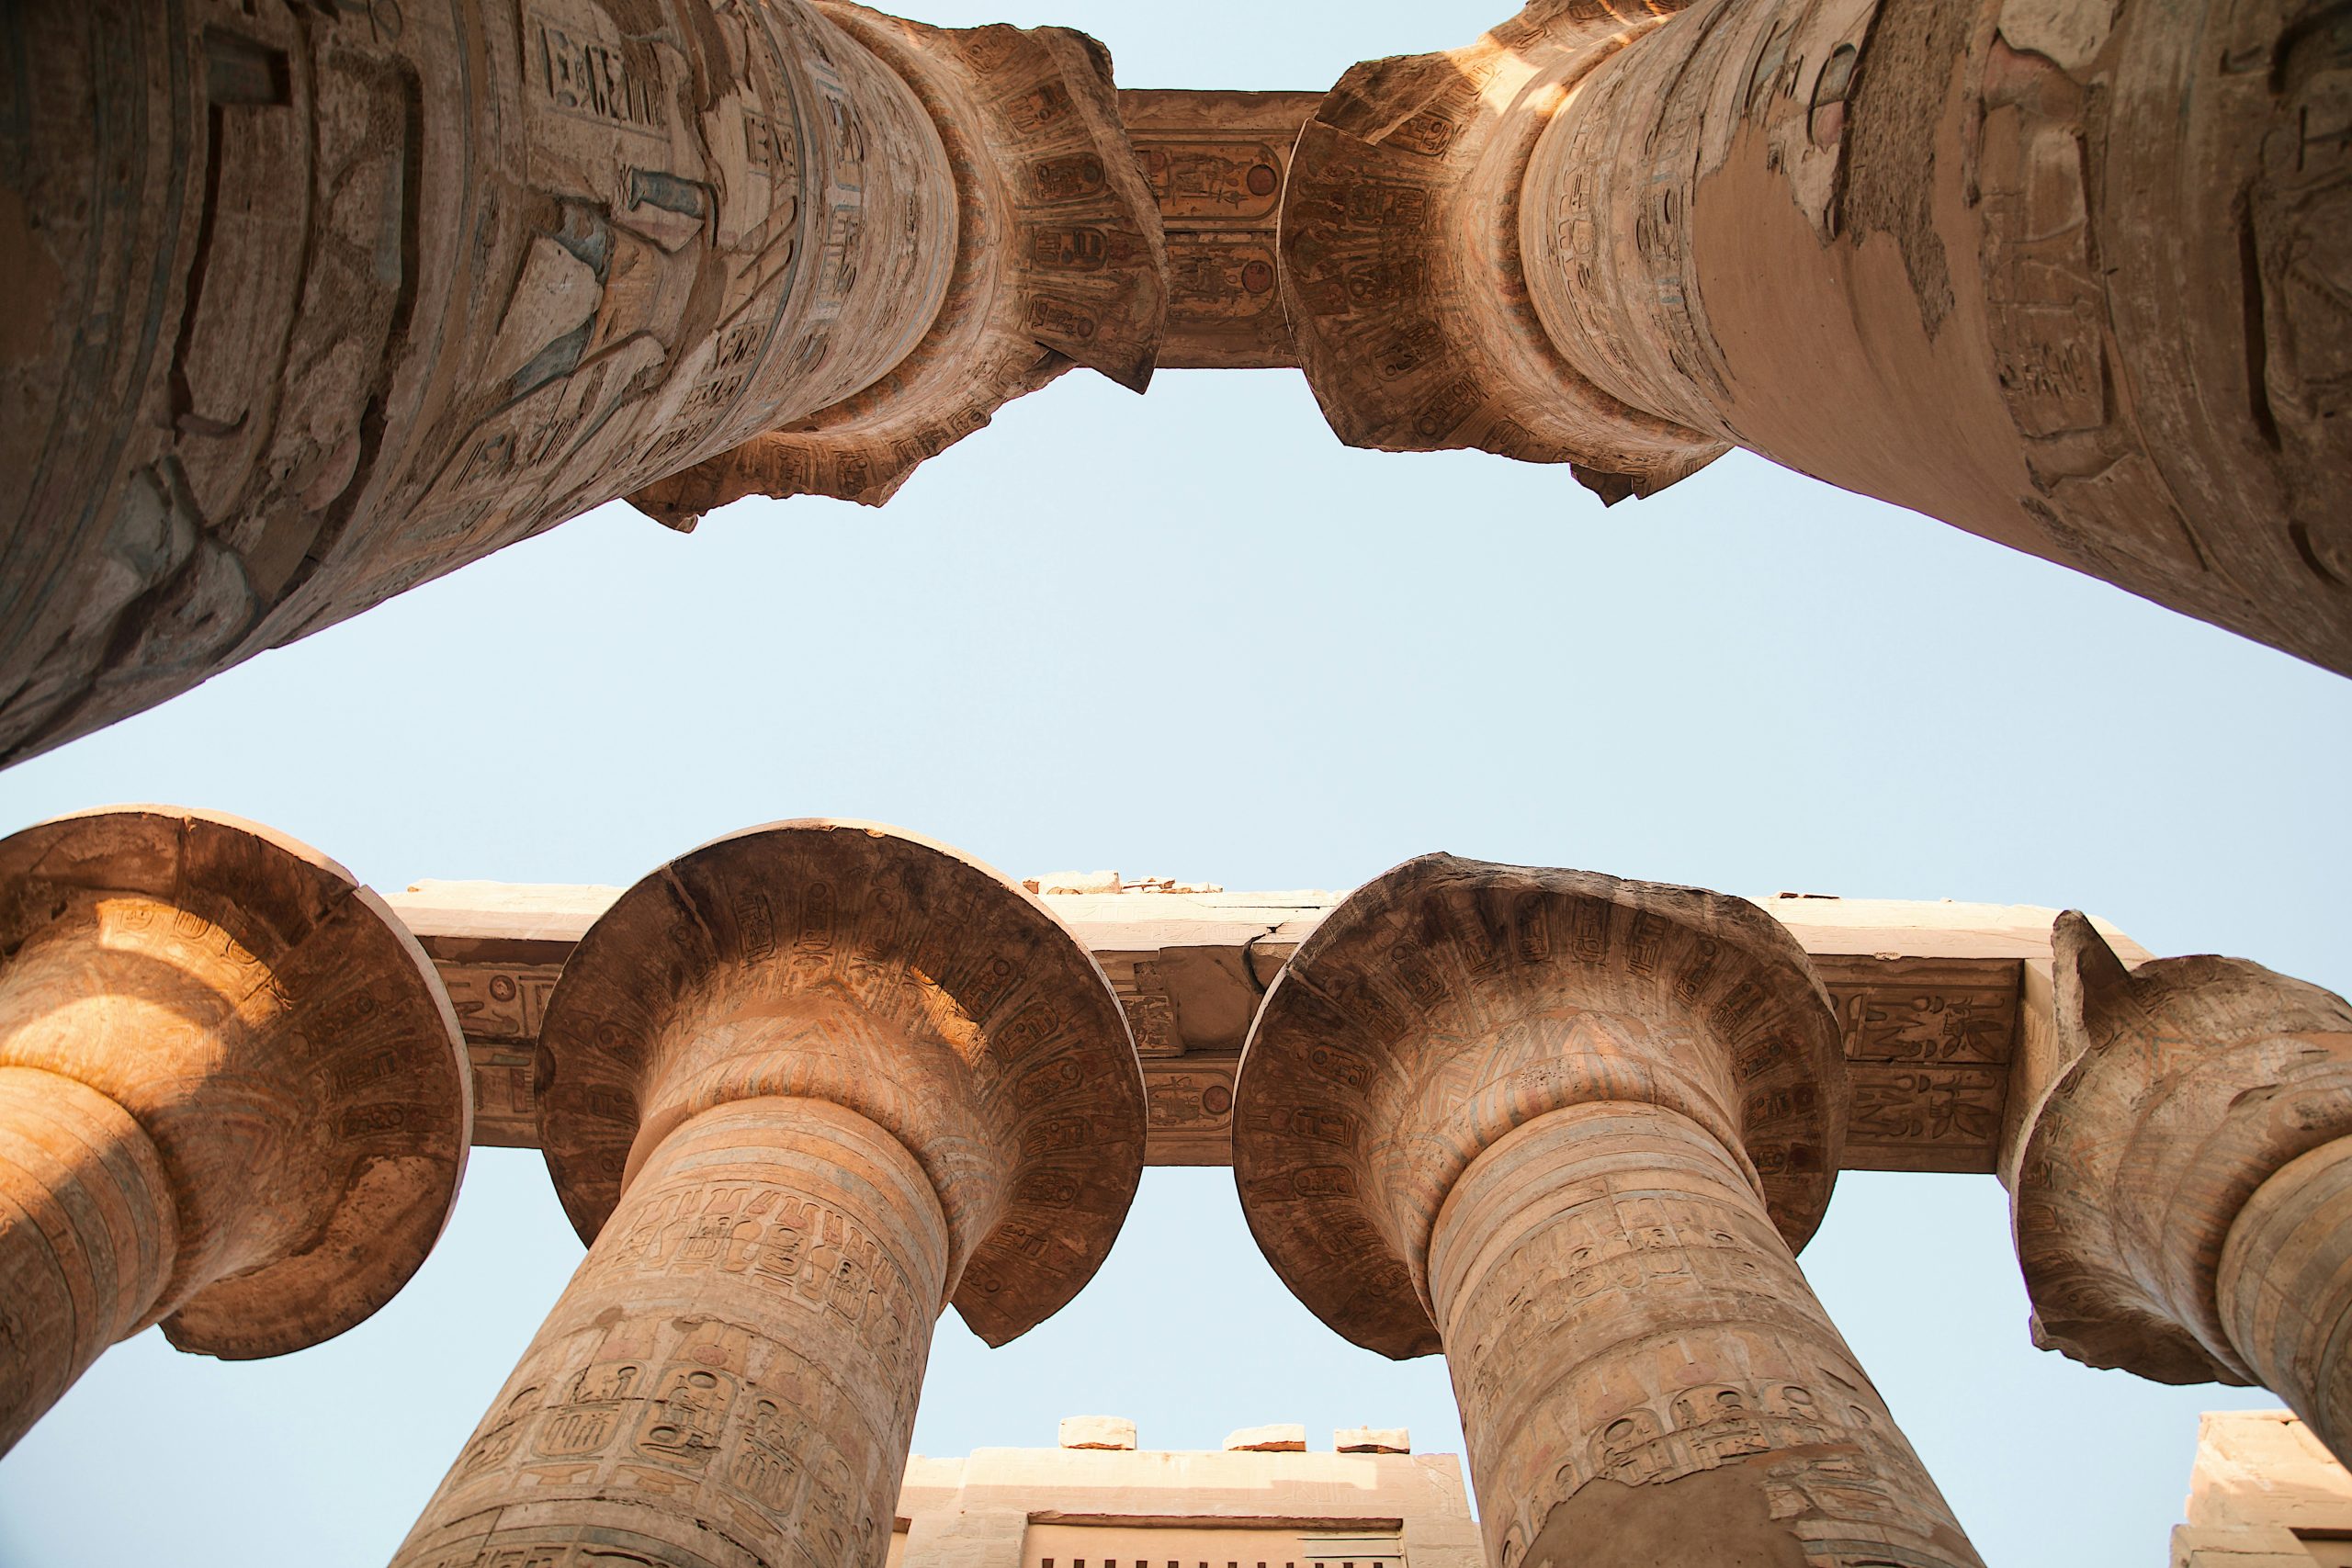 experience the wonders of egypt with a picturesque nile cruise. explore ancient temples, vibrant markets, and stunning landscapes on a luxurious nile cruise adventure.